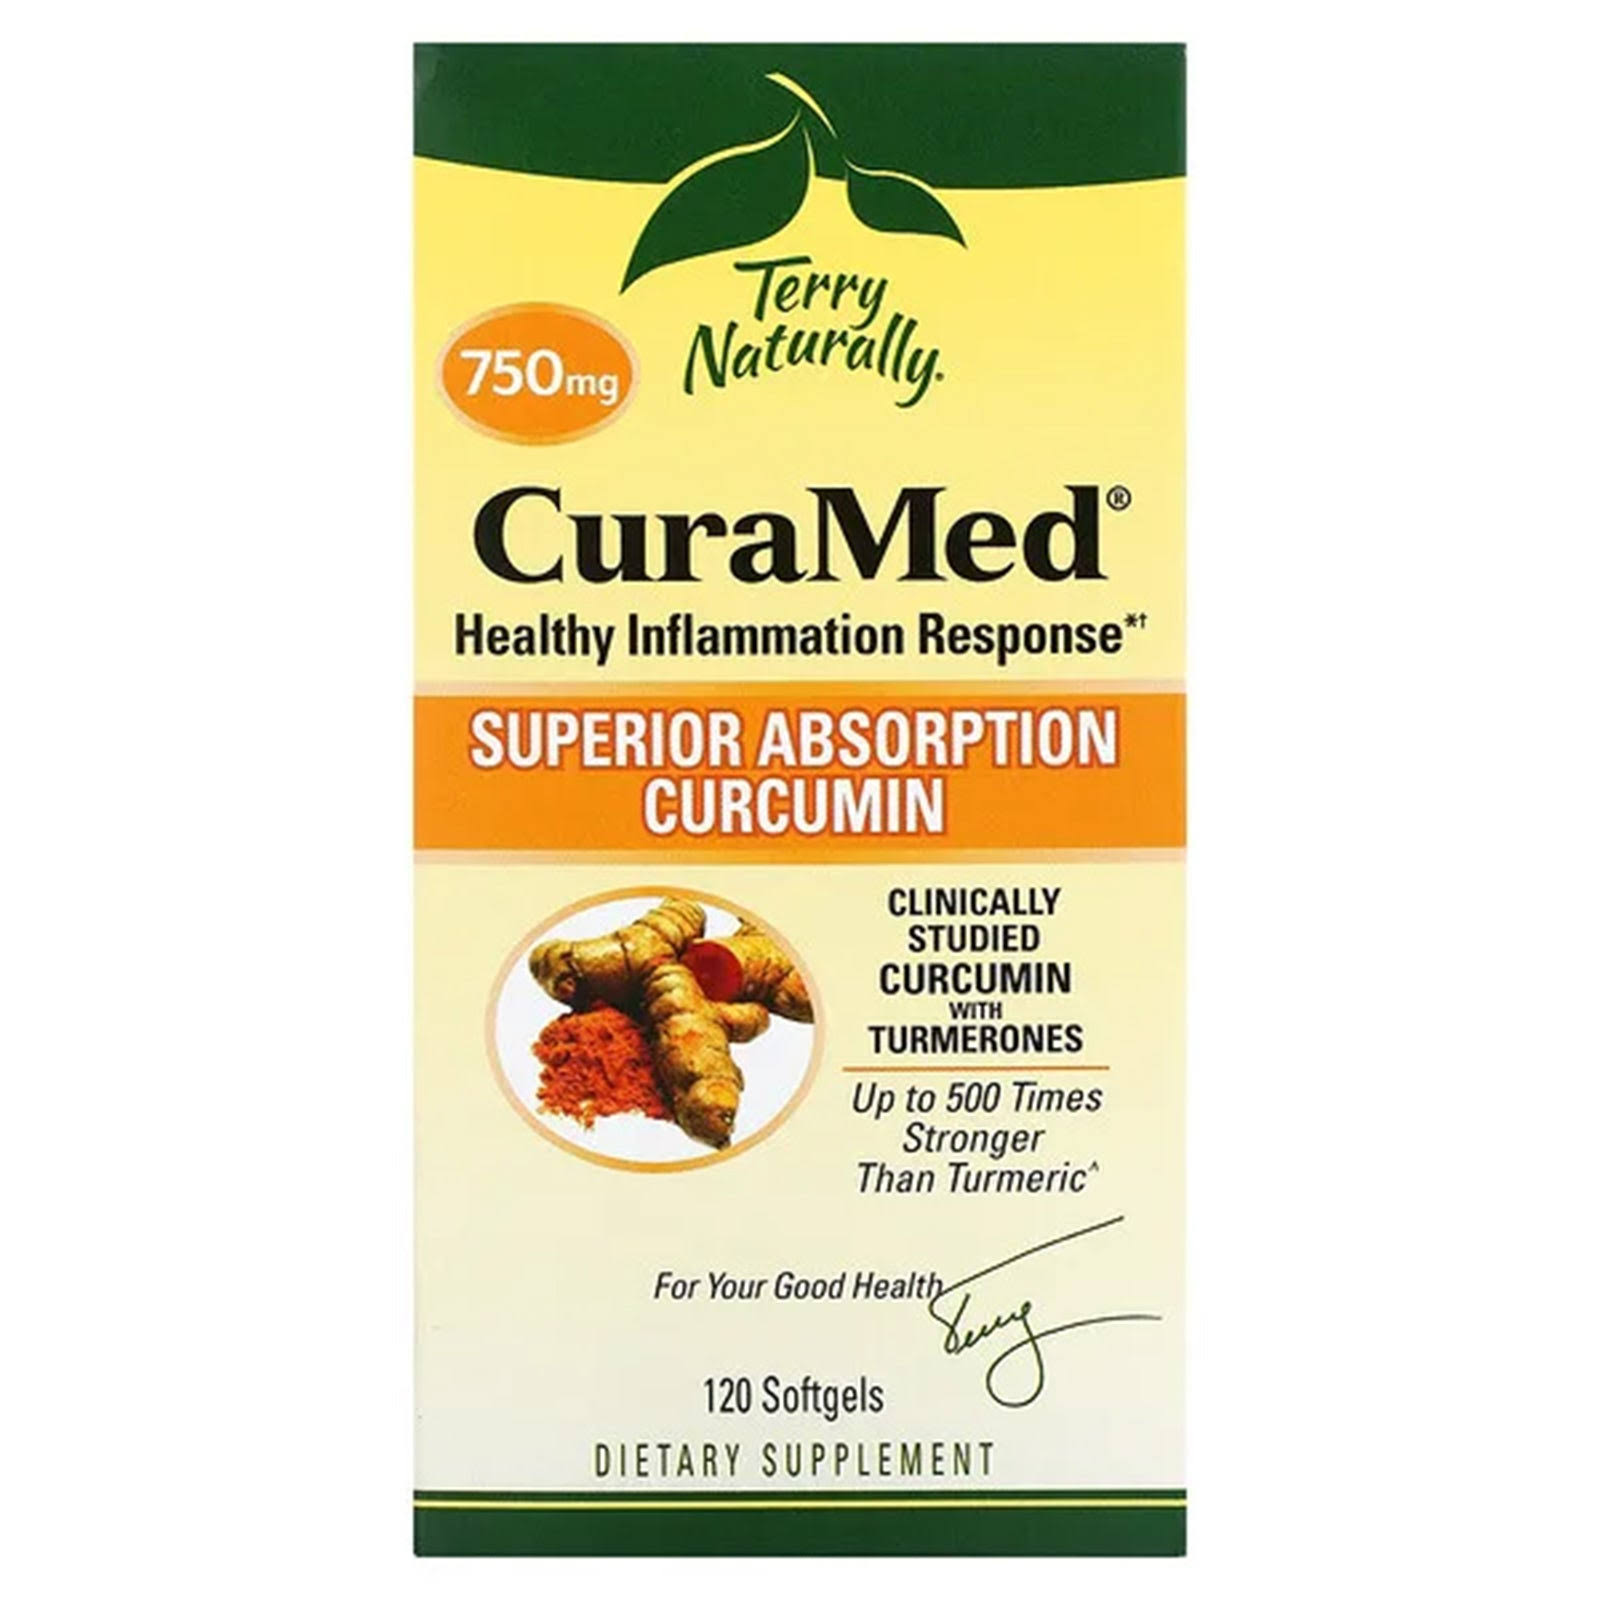 Terry Naturally CuraMed - 750mg